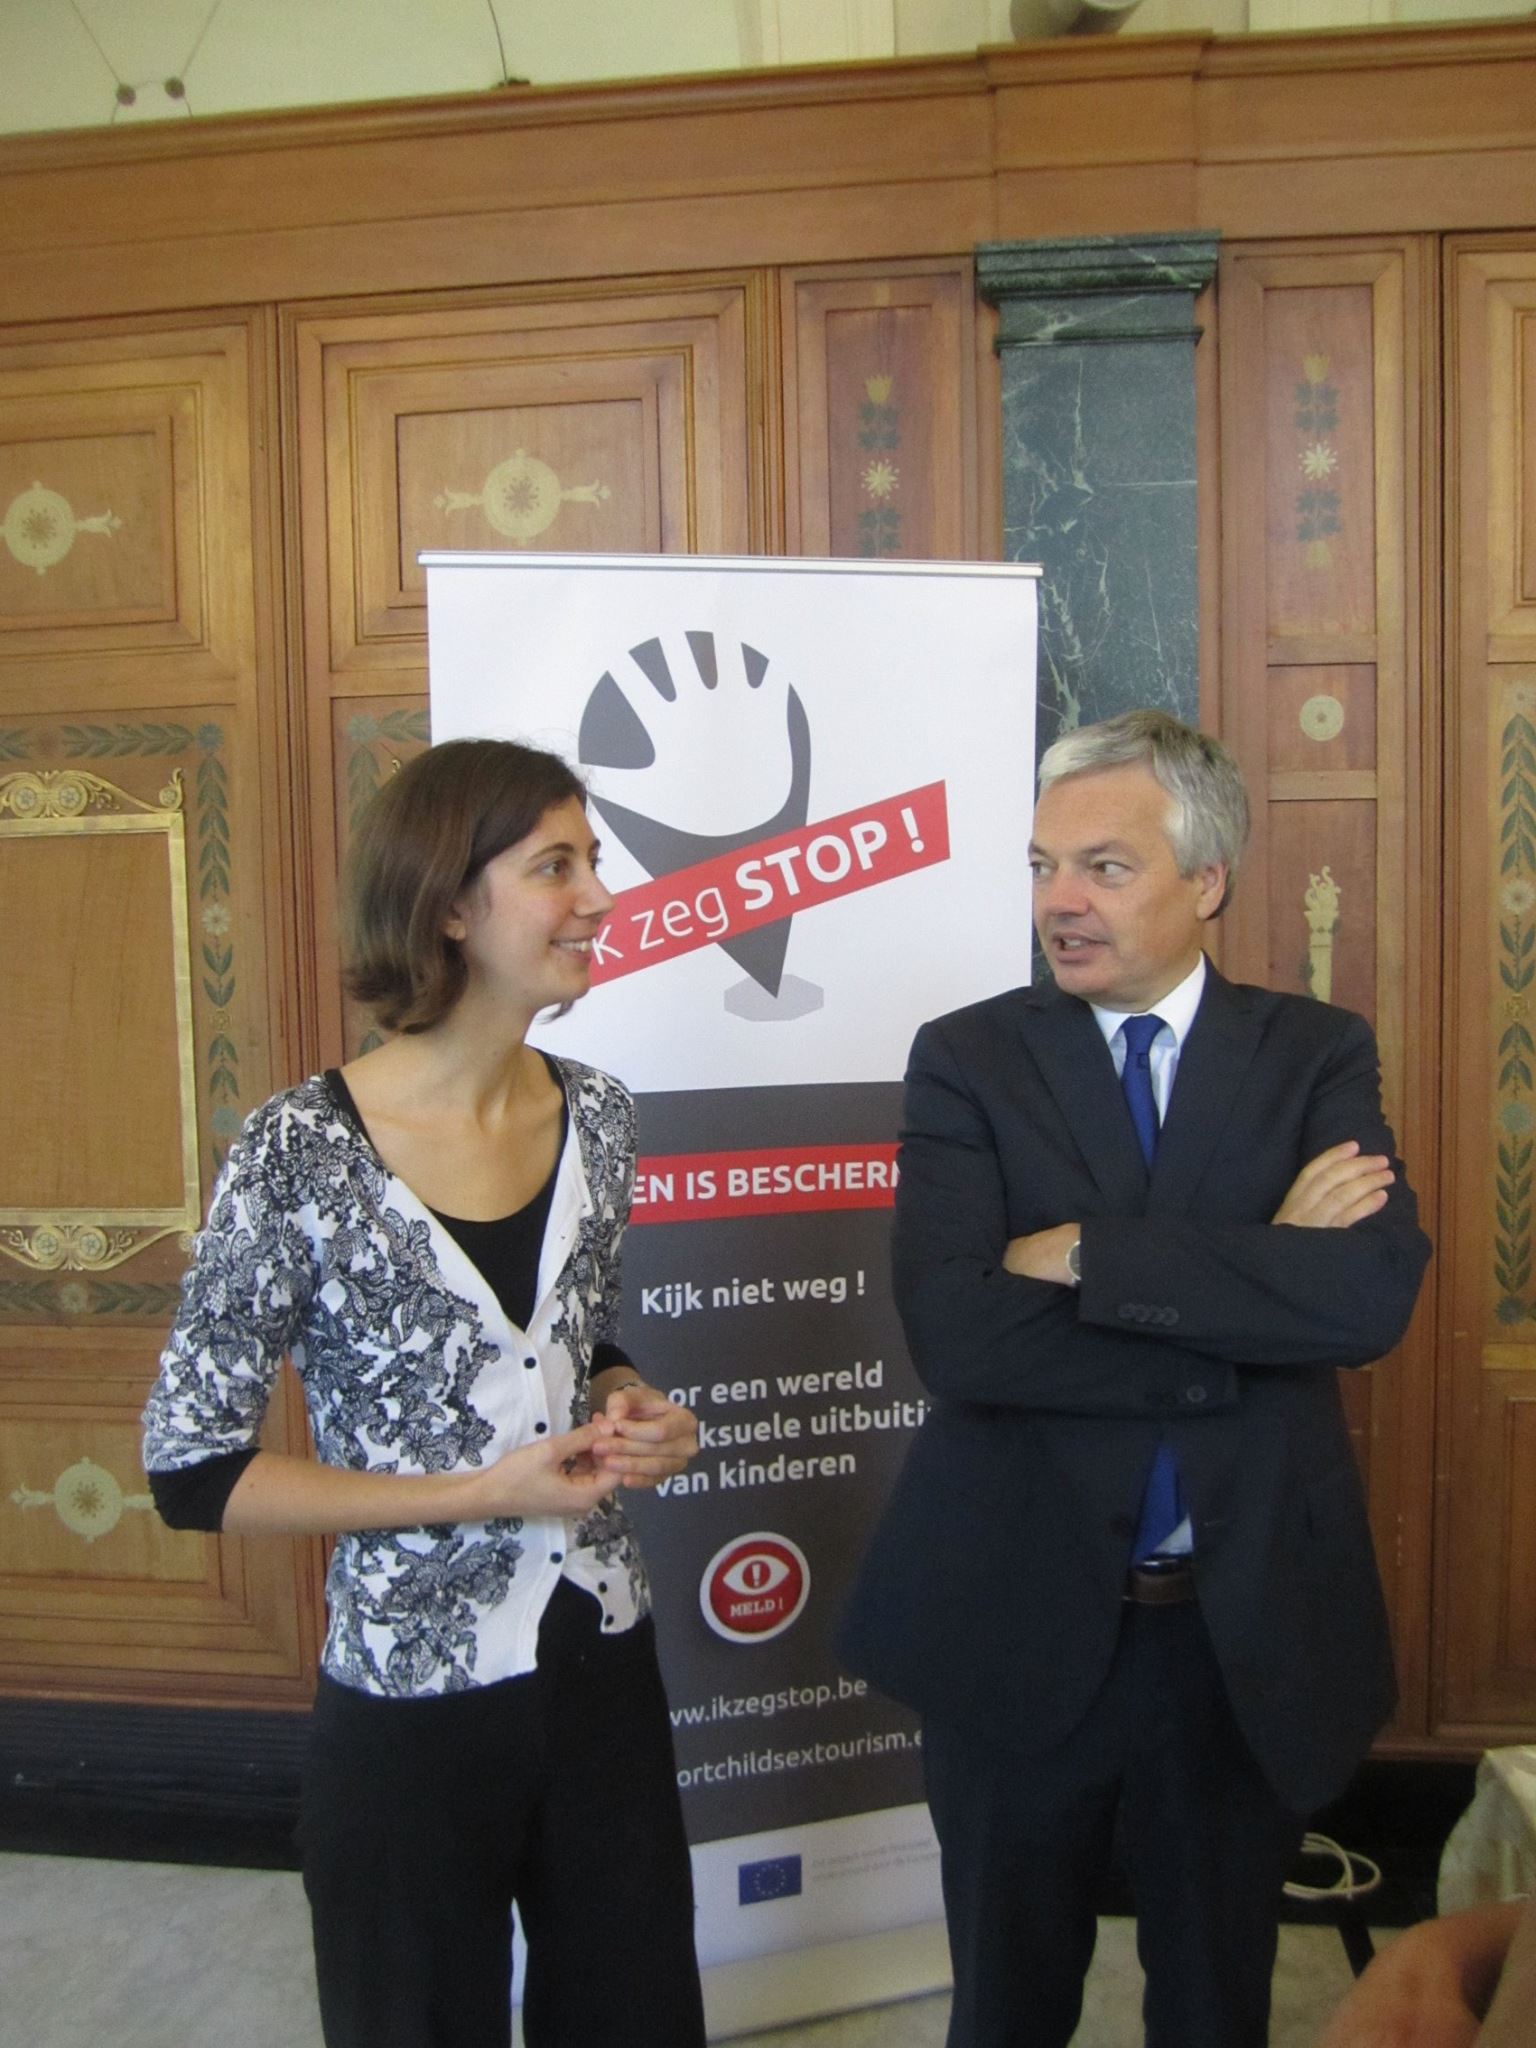 Ariane Couvreur from ECPAT Belgium & Didier Reynders, Belgium's Foreign Affairs Minister